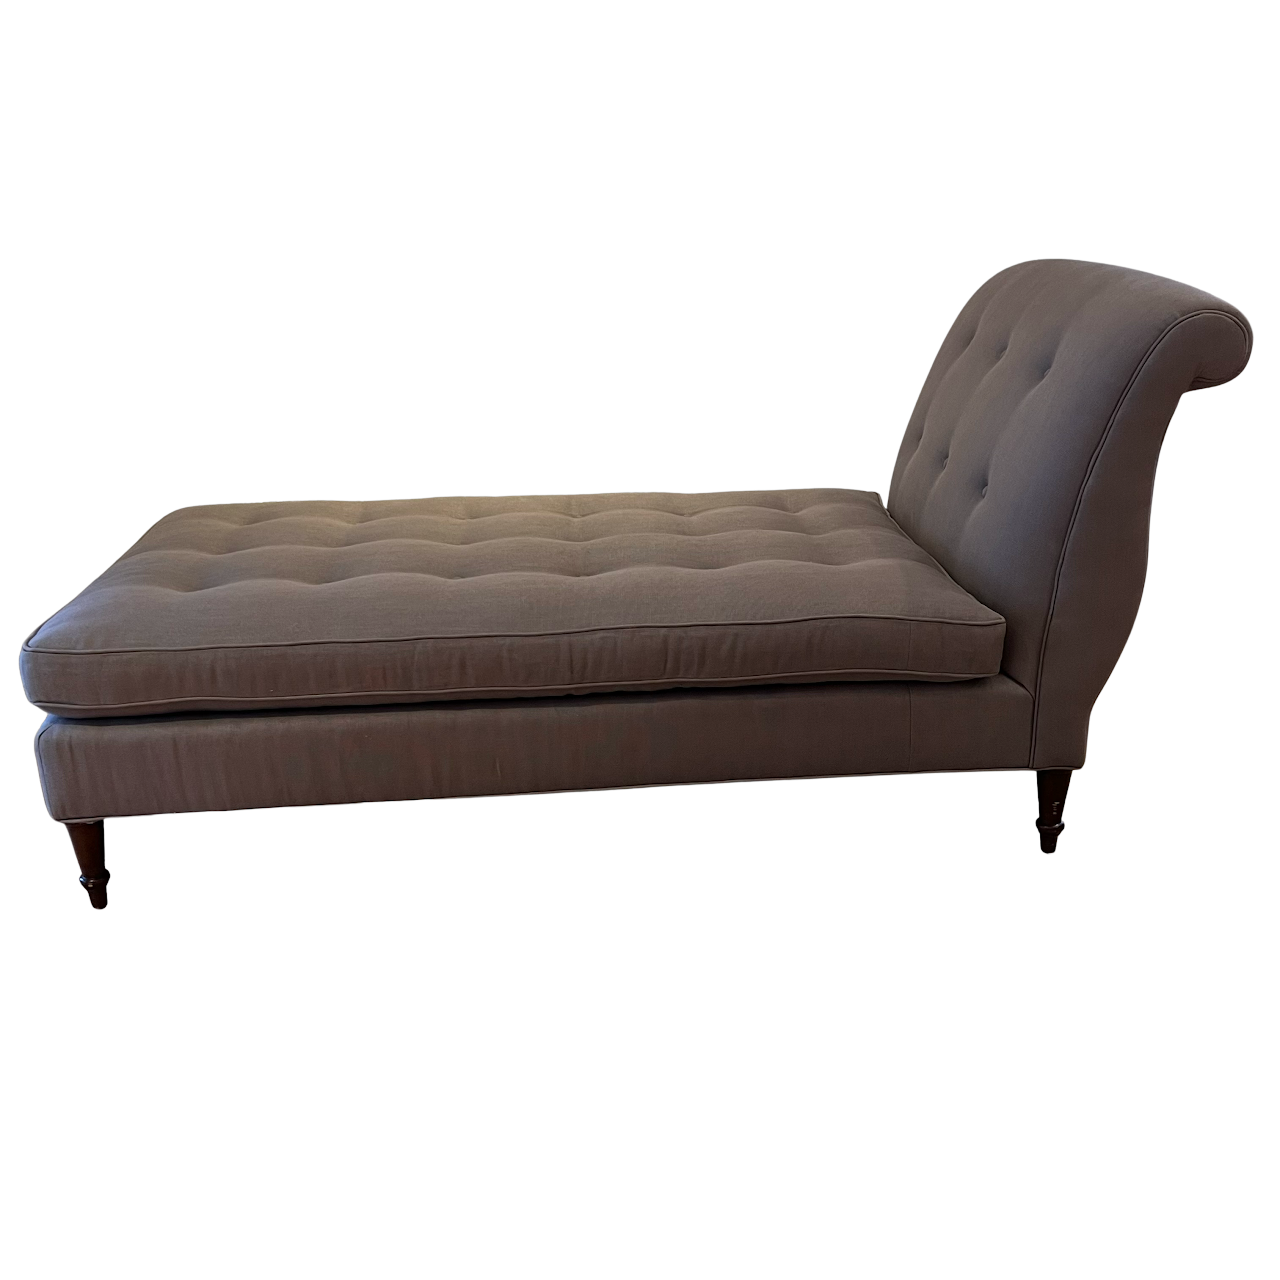 Jonathan-Wesley Upholstery Button-Tufted Chaise Lounge